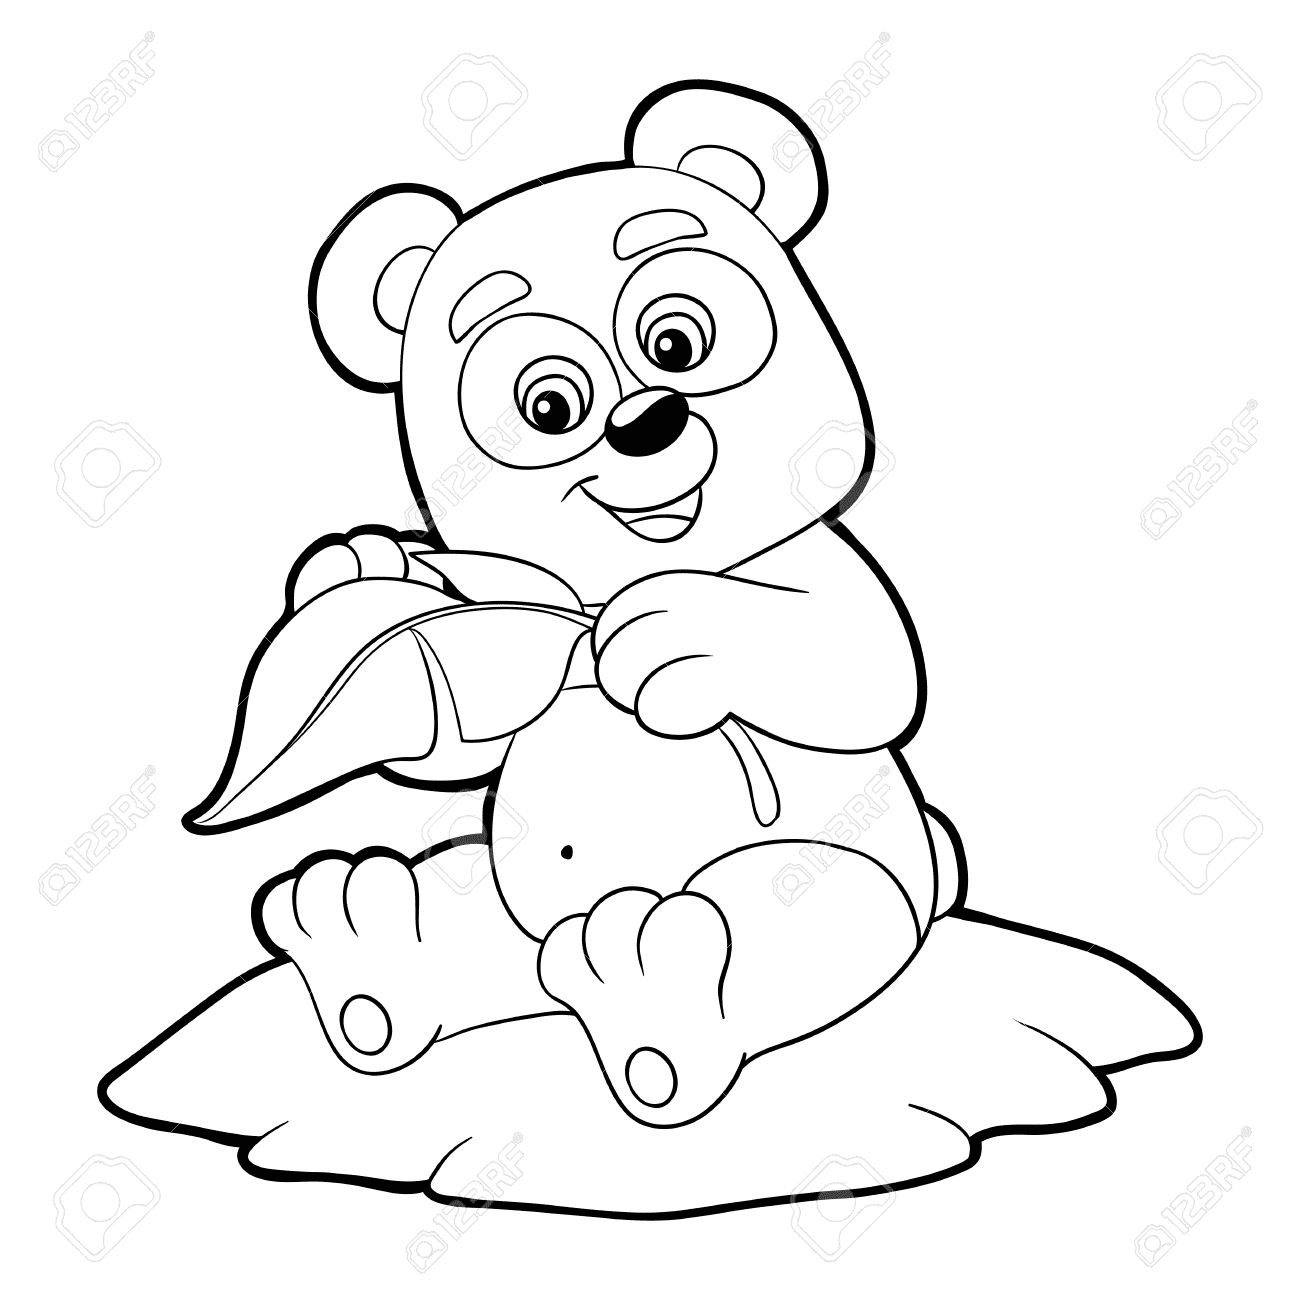 Panda Holding Leaf Coloring Page